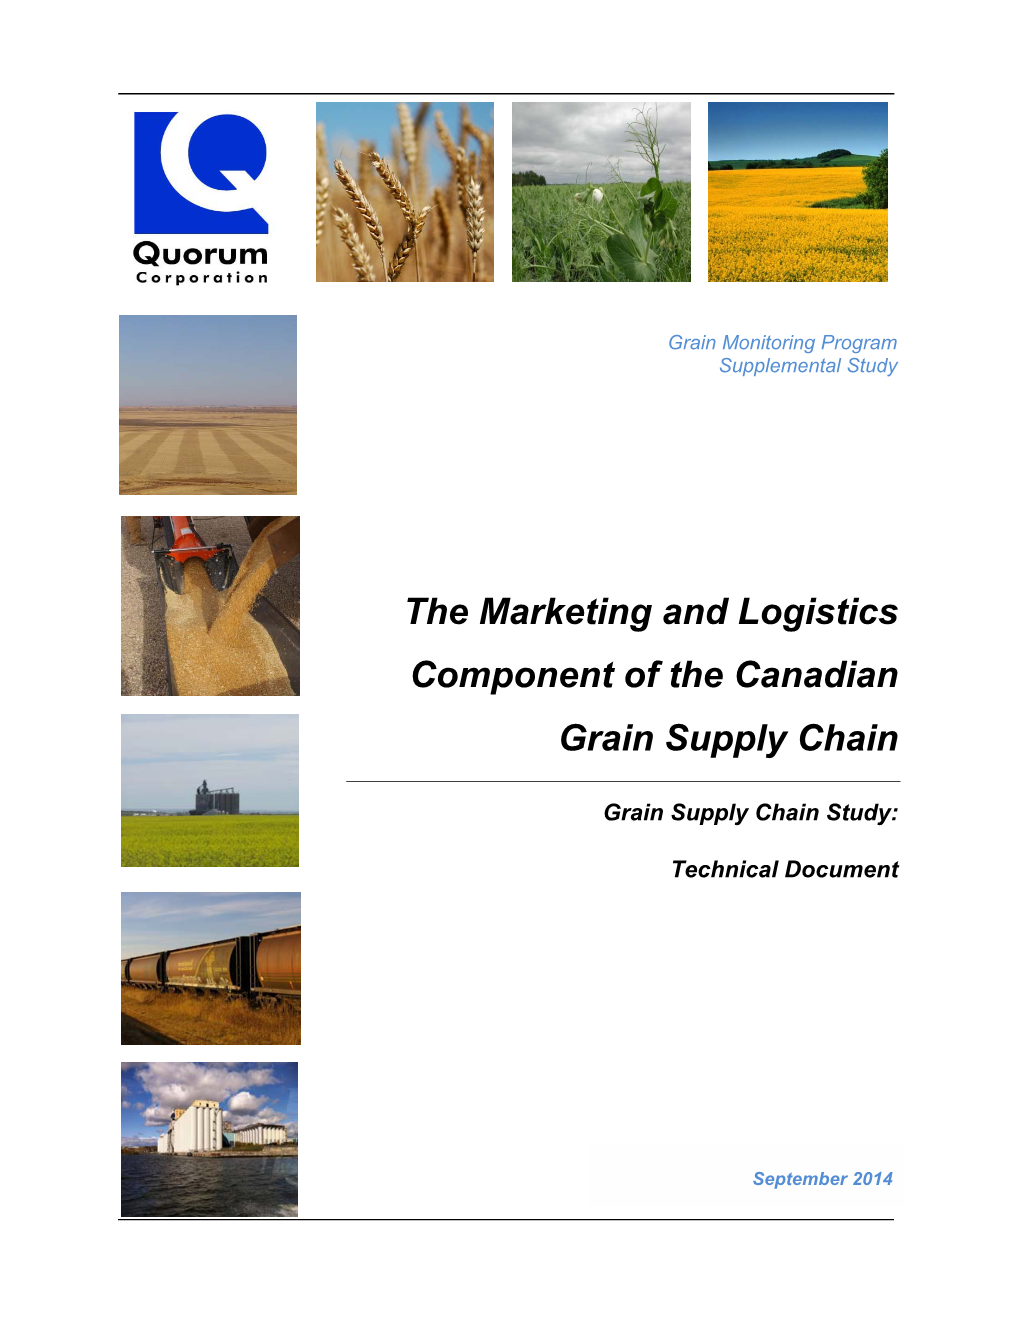 The Marketing and Logistics Component of the Canadian Grain